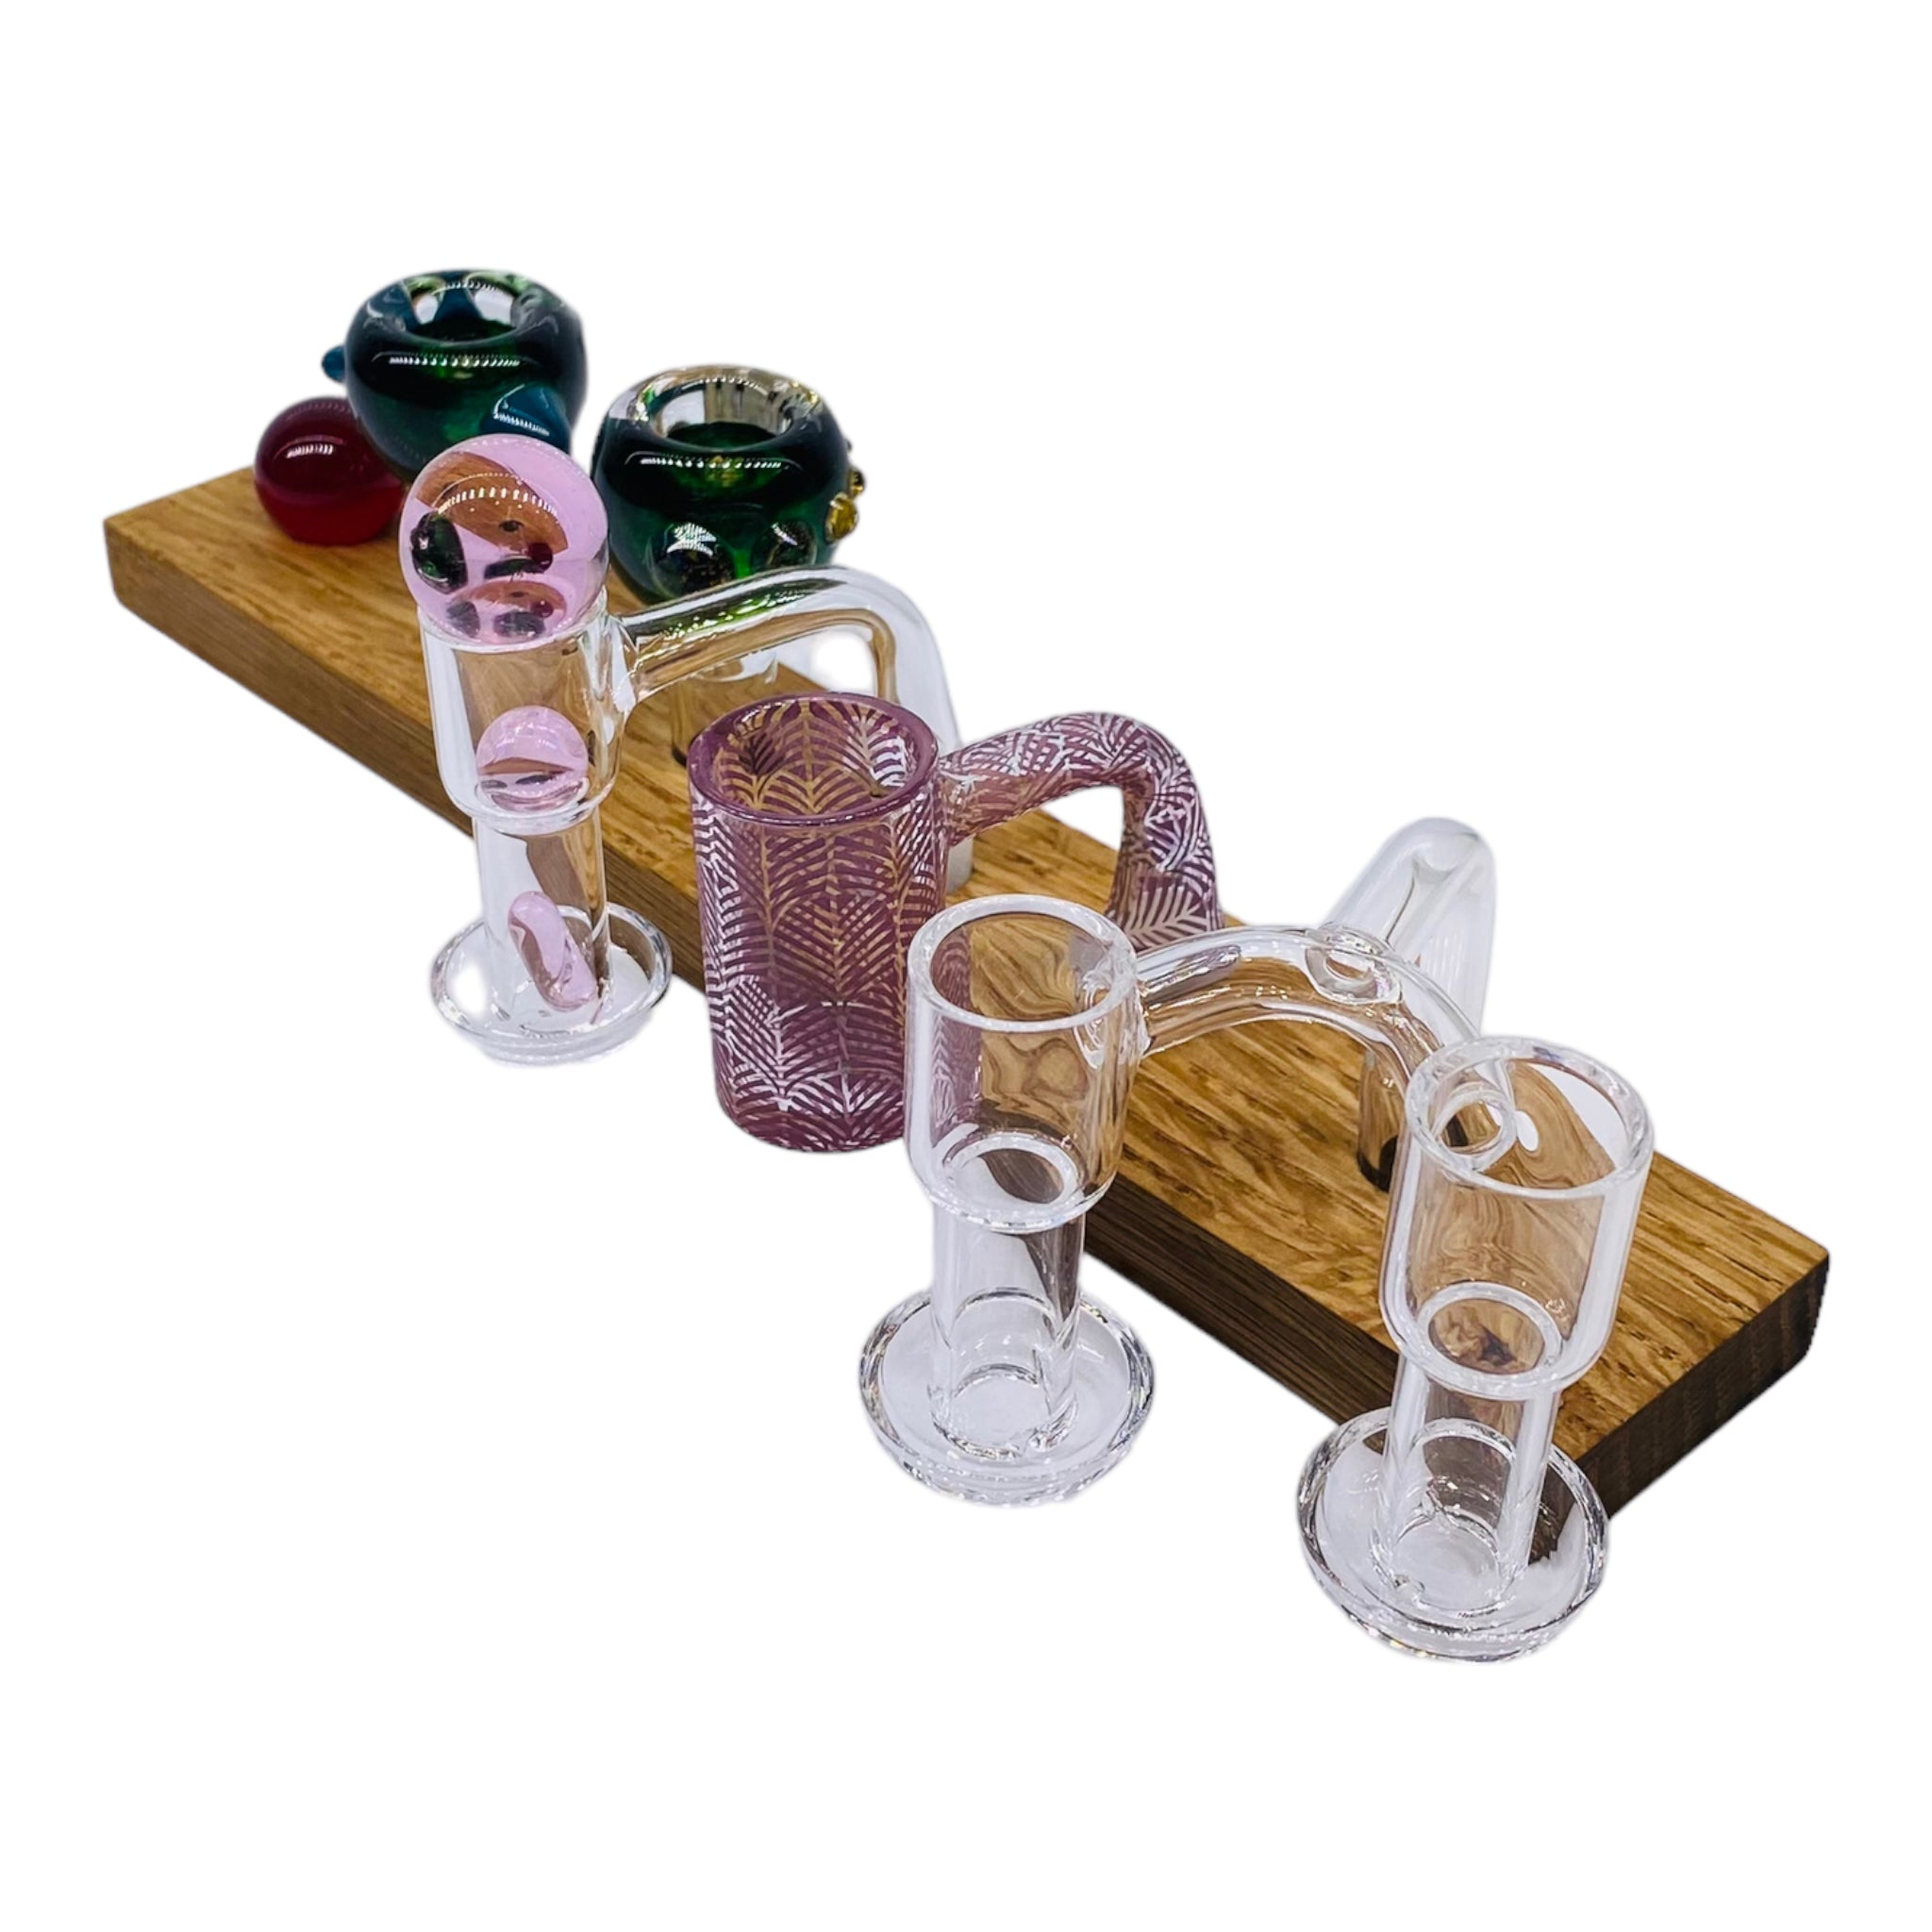 5 Hole Wood Display Stand Holder For 14mm Bong Bowl Pieces Or Quartz Bangers - White Oak